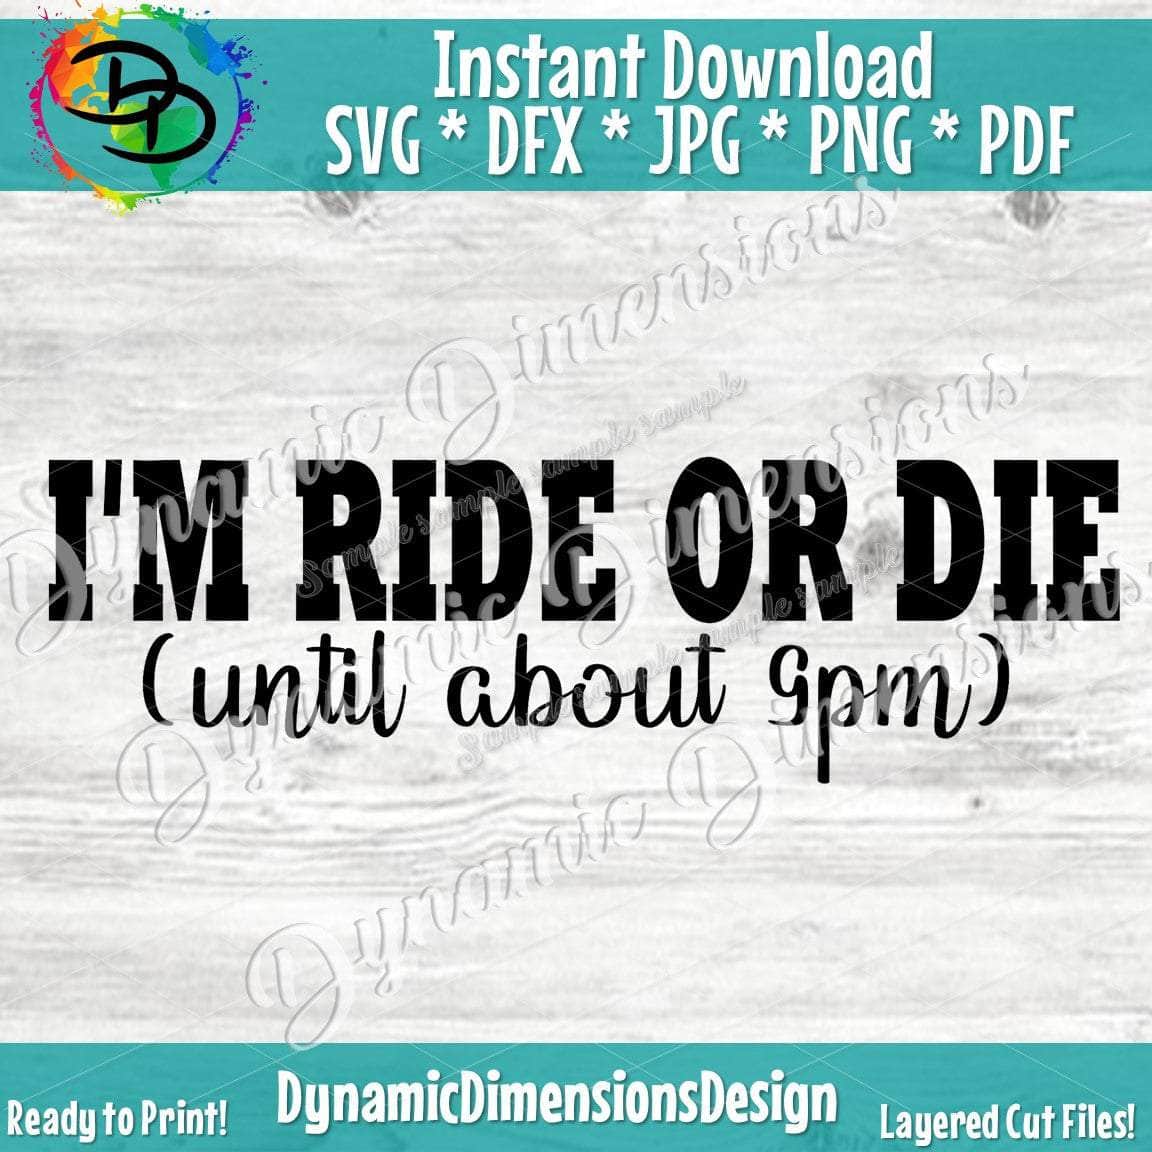 I'm Ride or Die (until about 9pm)